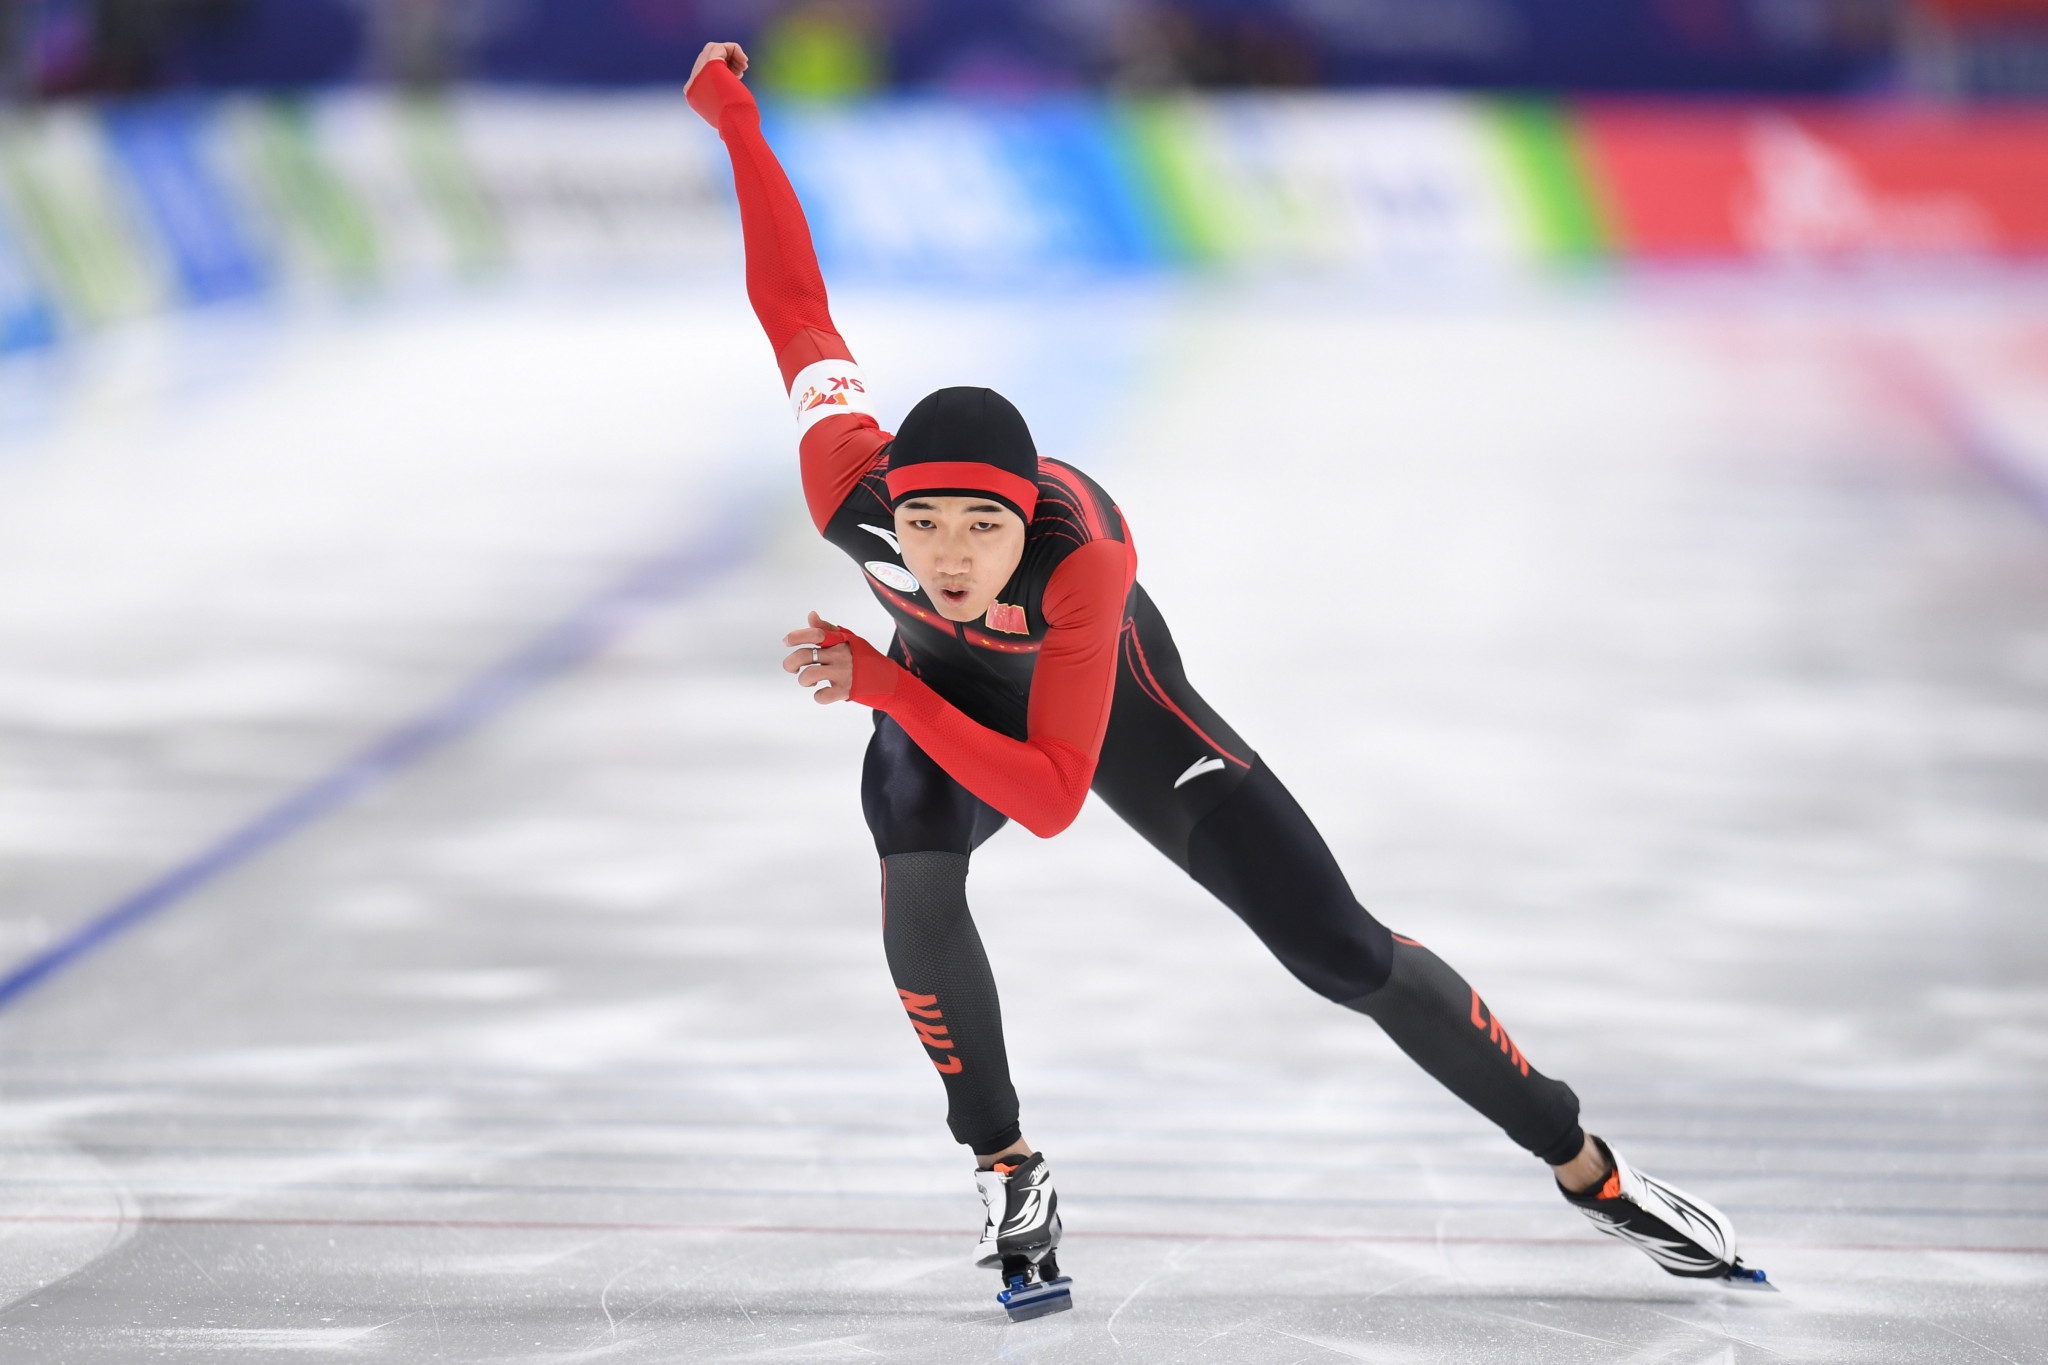 Gao Tingyu is set to miss the ISU Speed Skating World Cup season to nurse injuries ©Getty Images